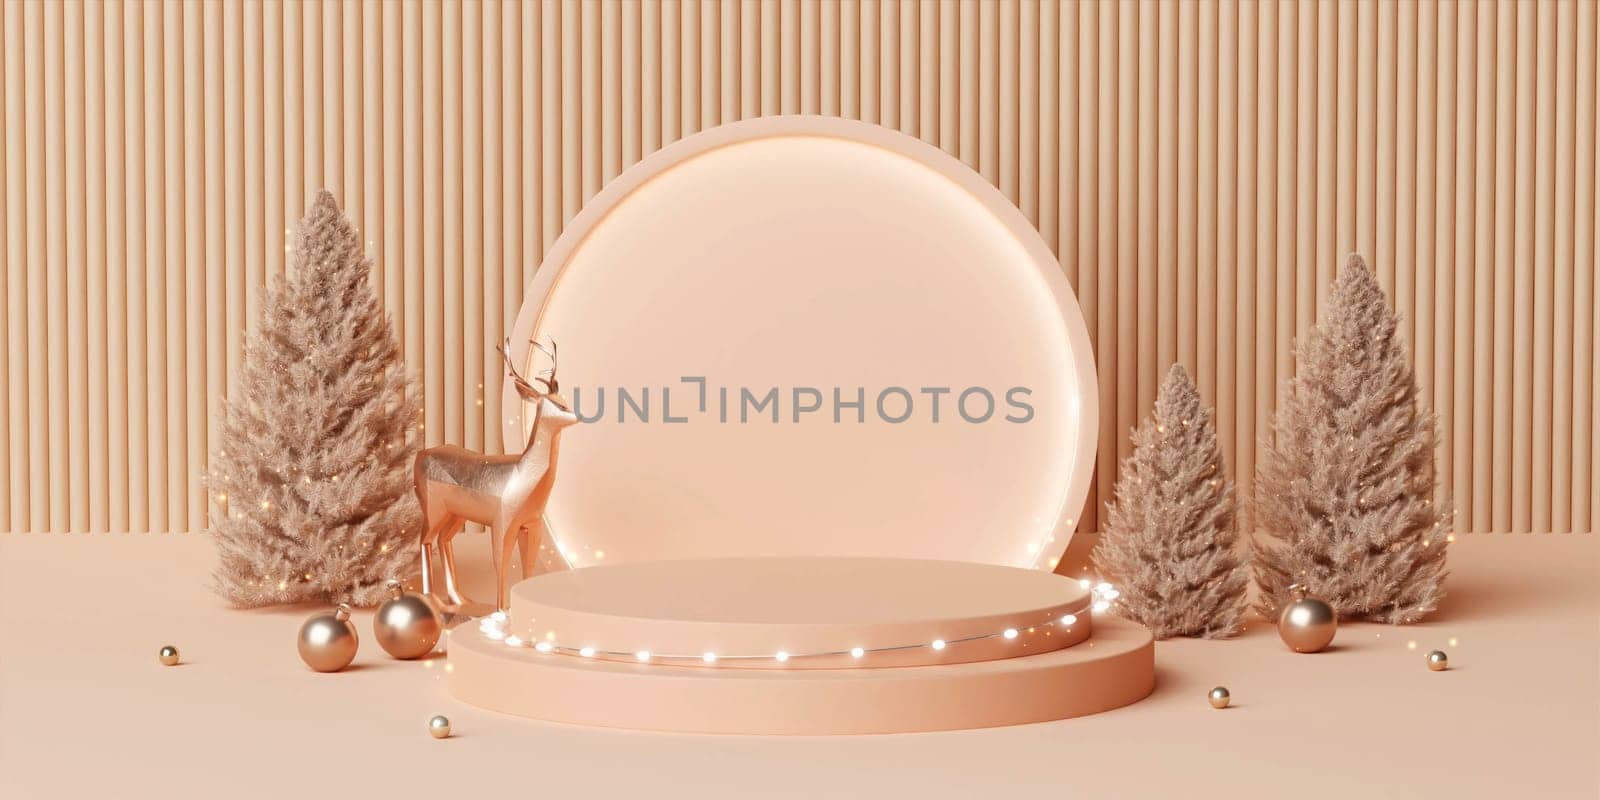 3d Christmas podium template design. Merry Christmas text with gold deer and pine tree elements for xmas mock up presentation background. by meepiangraphic